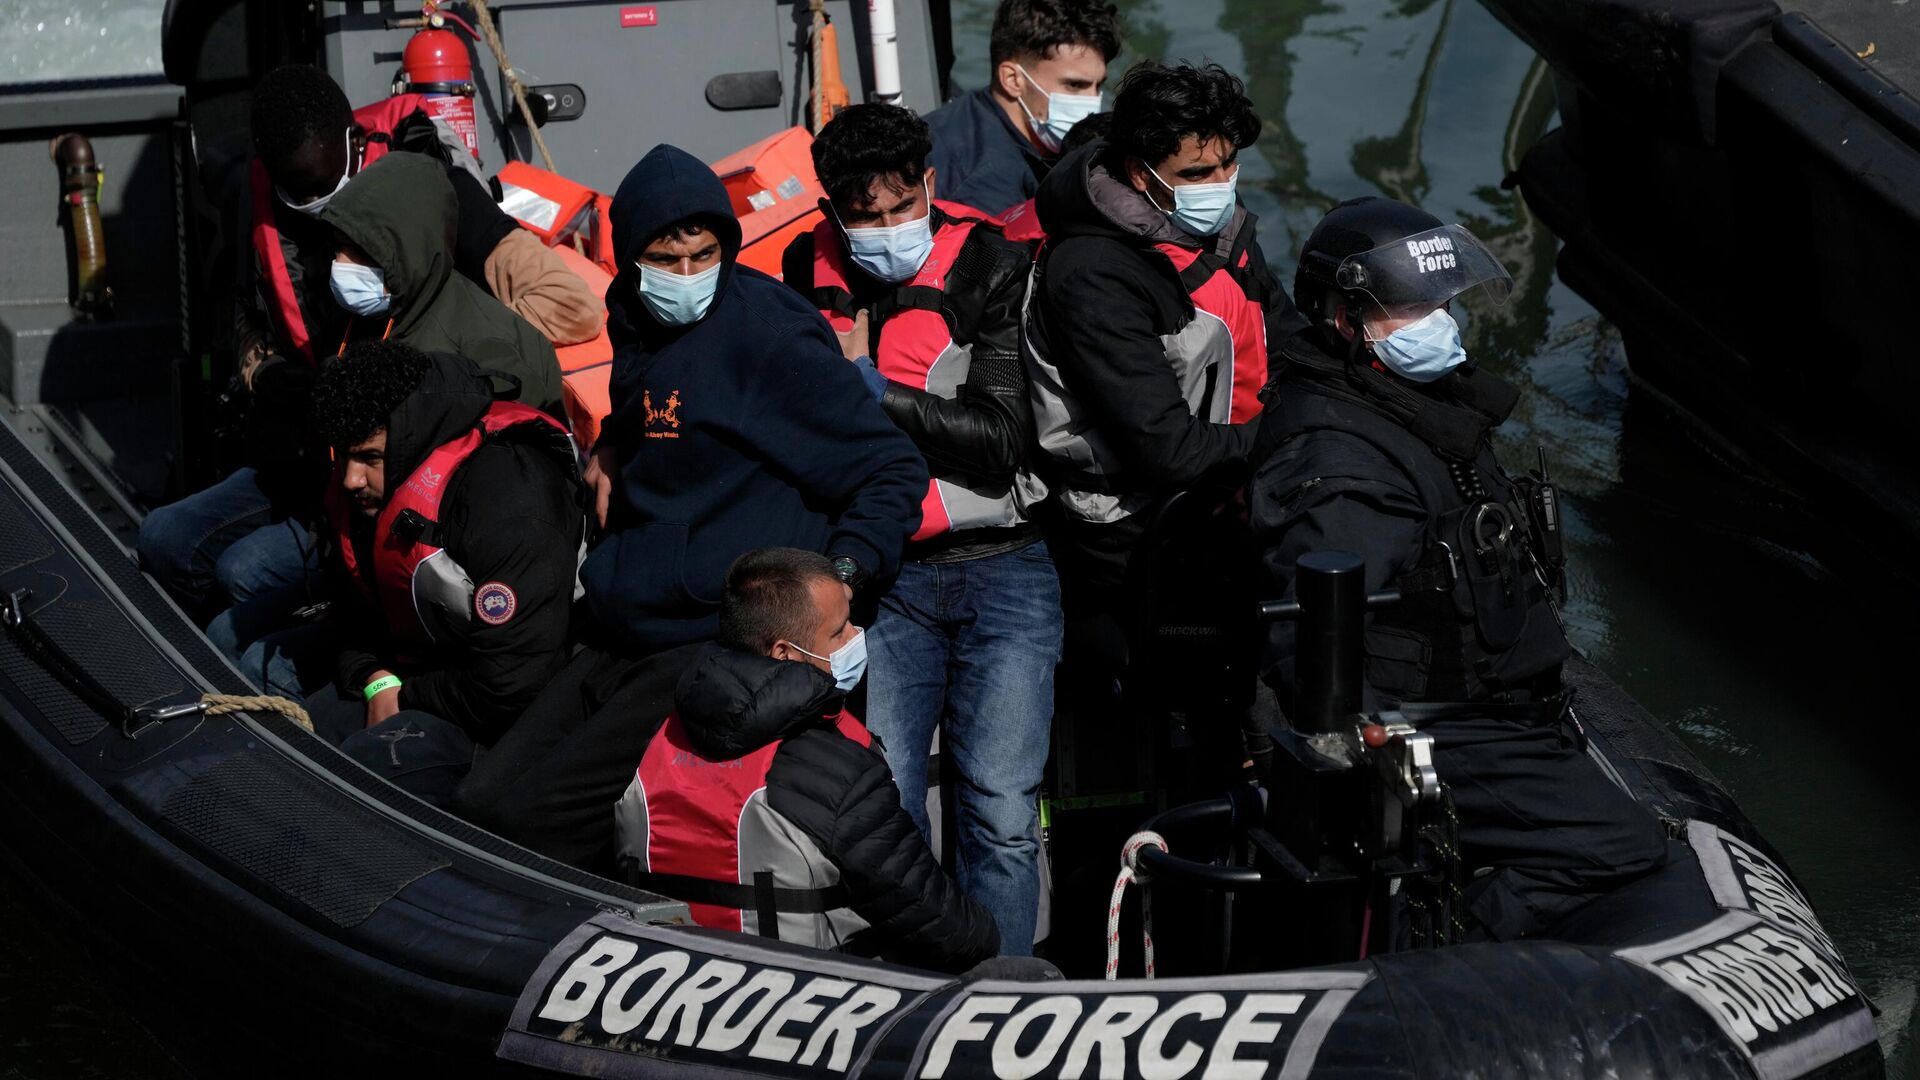 People thought to be migrants who undertook the crossing from France in small boats and were picked up in the Channel, arrive to be disembarked from a small transfer boat which ferried them from a larger British border force vessel that didn't come into the port, in Dover, south east England, Friday, June 17, 2022 - Sputnik International, 1920, 22.06.2022